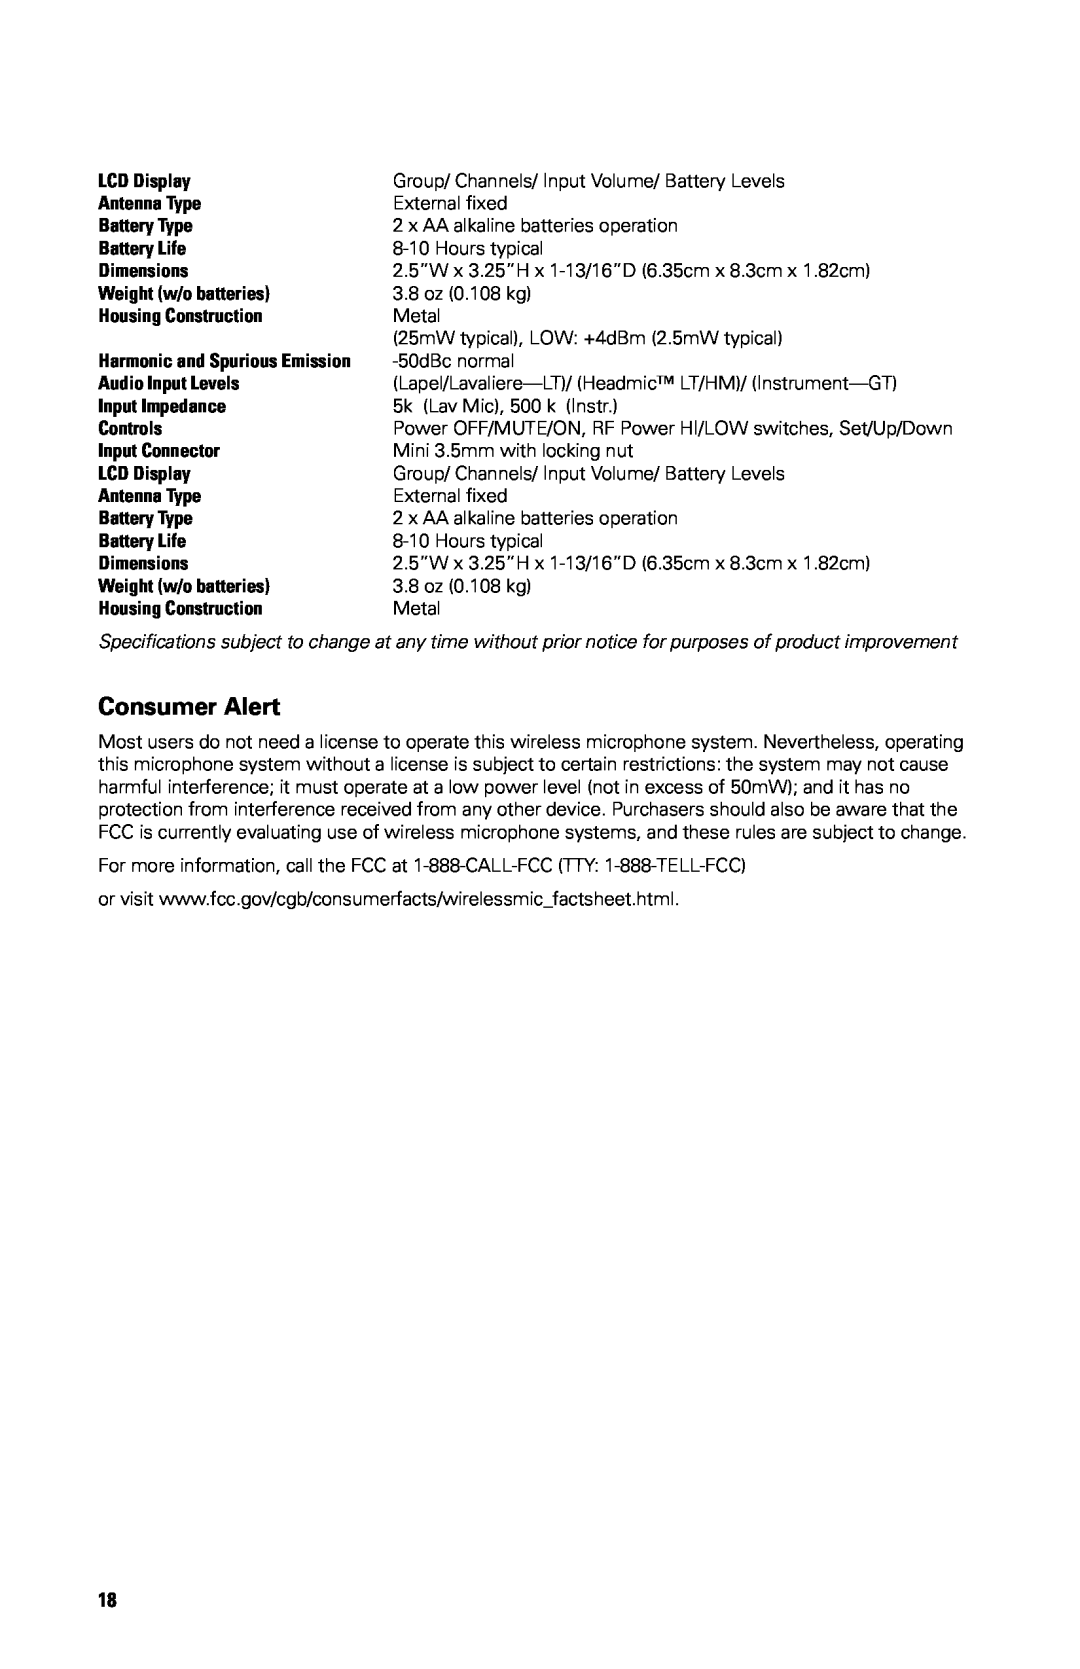 Nady Systems SW-1KU owner manual Consumer Alert 